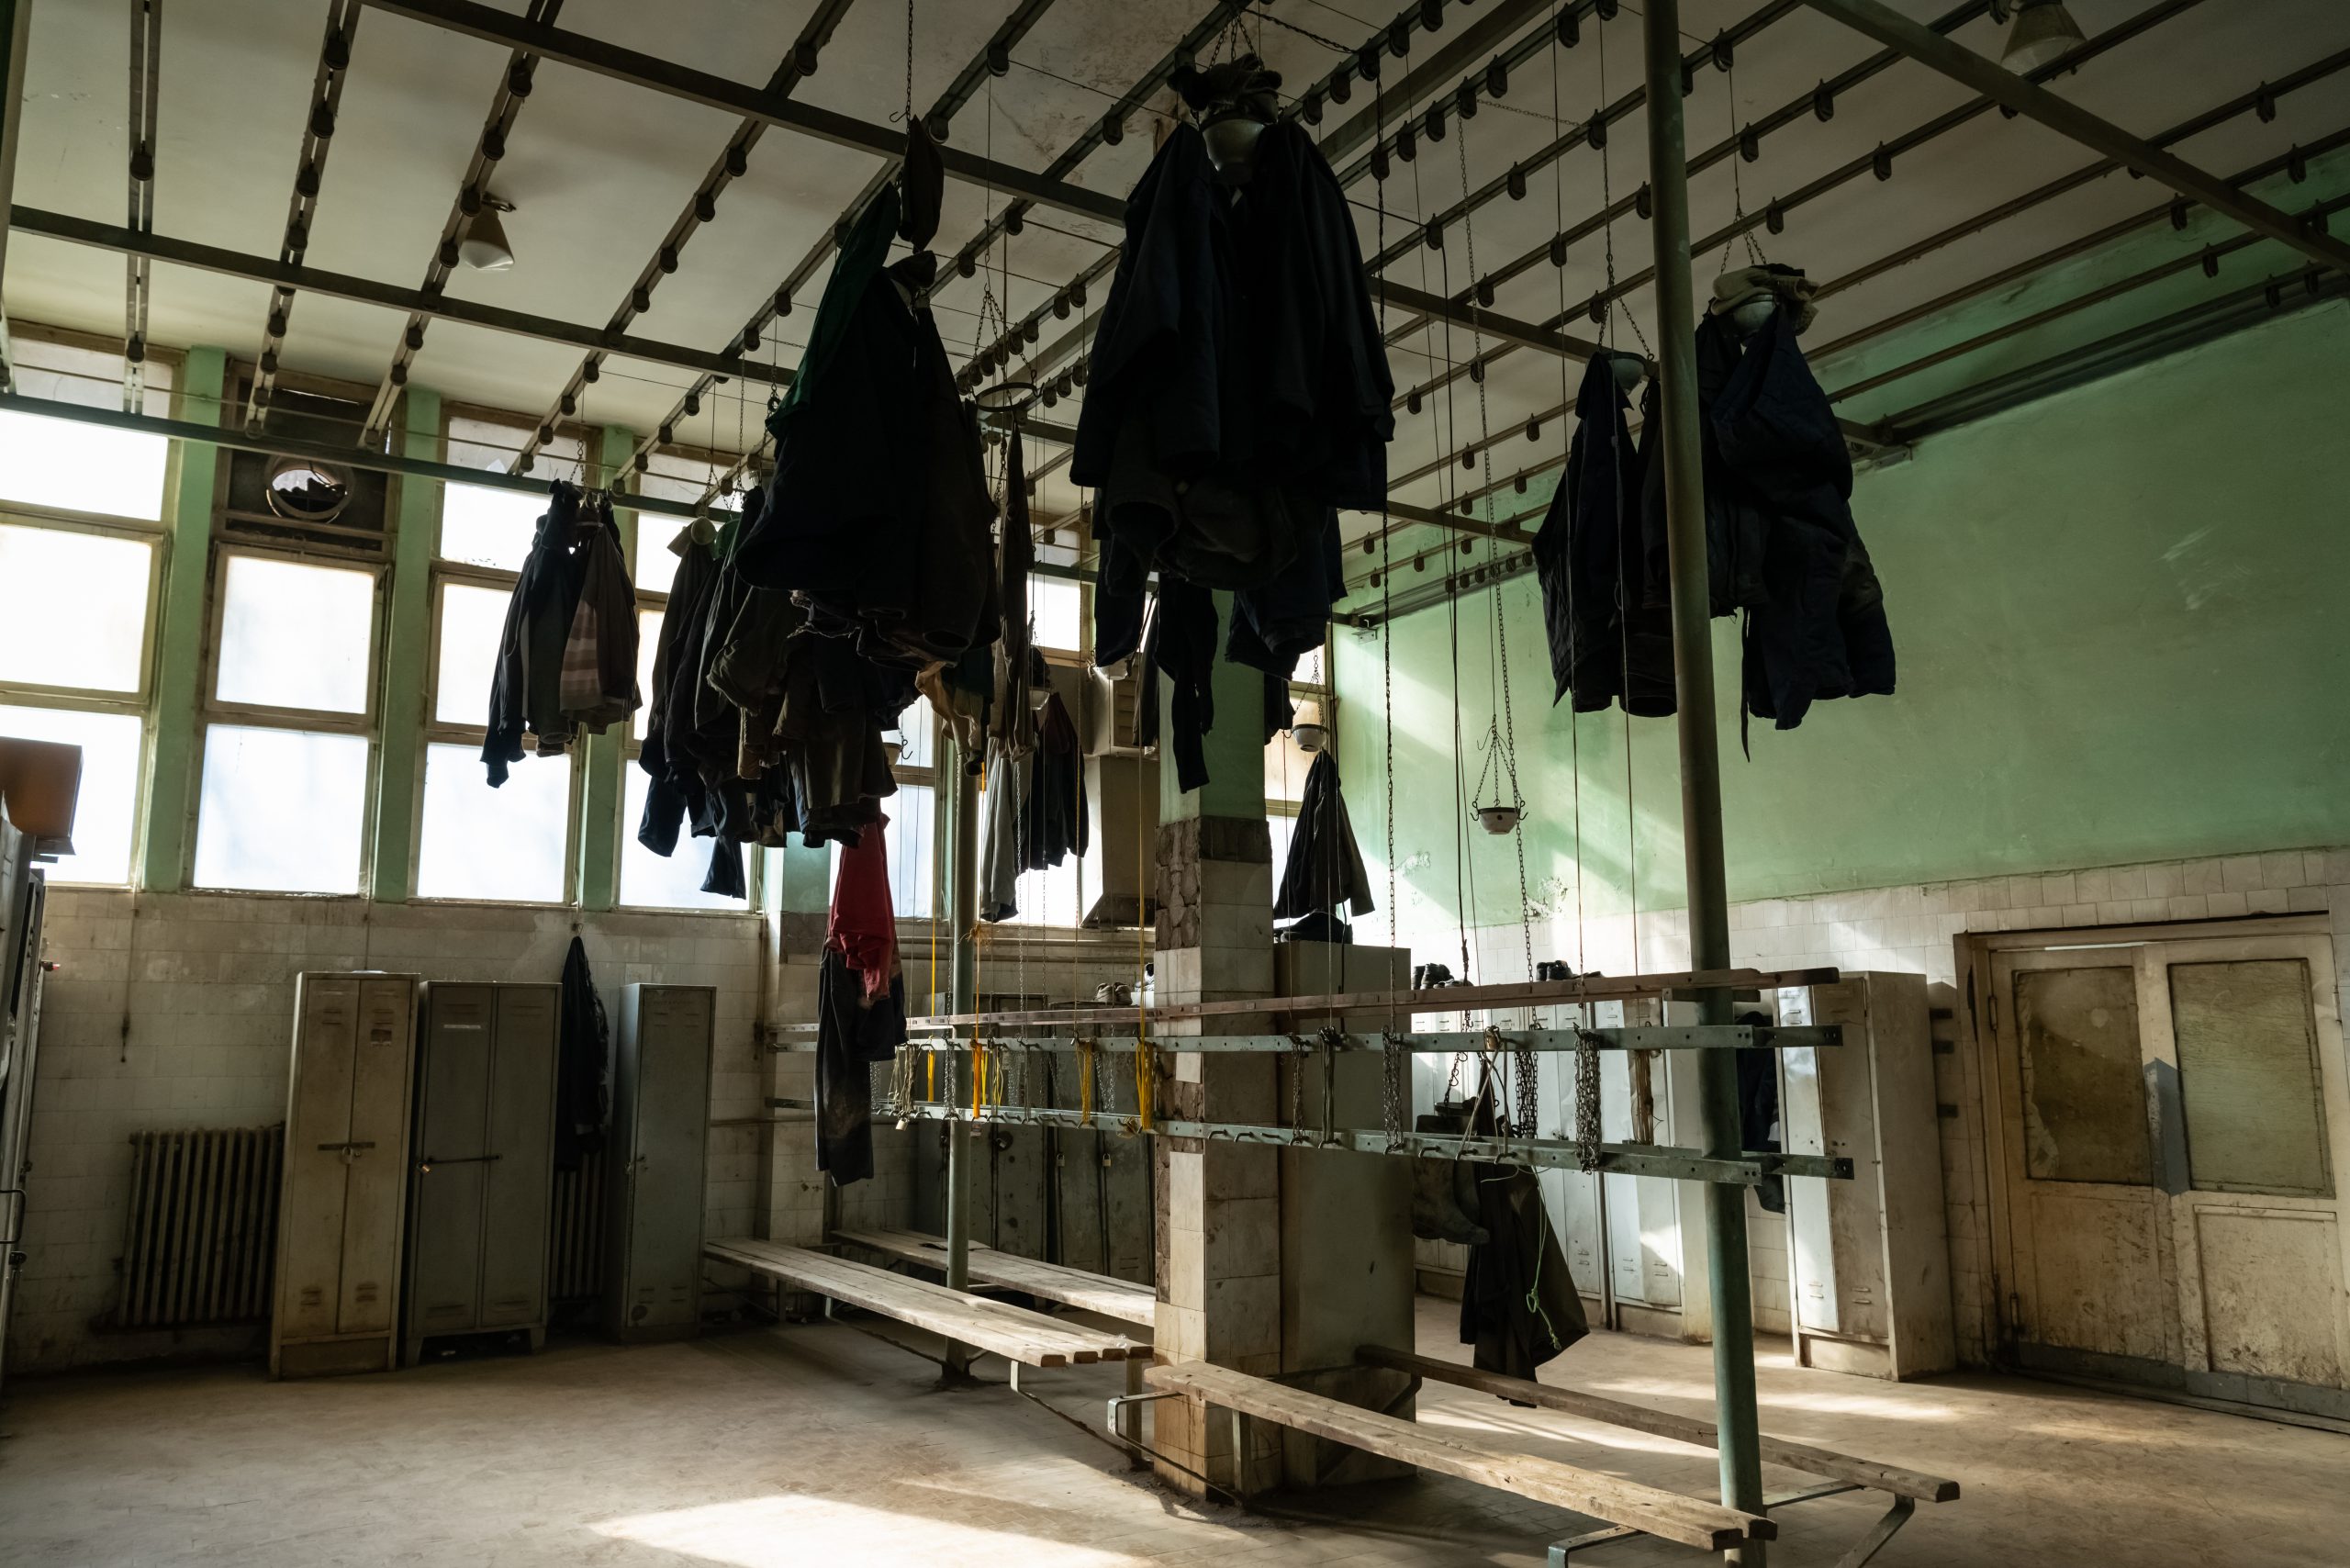 Uniforms hanging from the ceiling of the miners' changing room inside the Trepça facilities in Crnac.